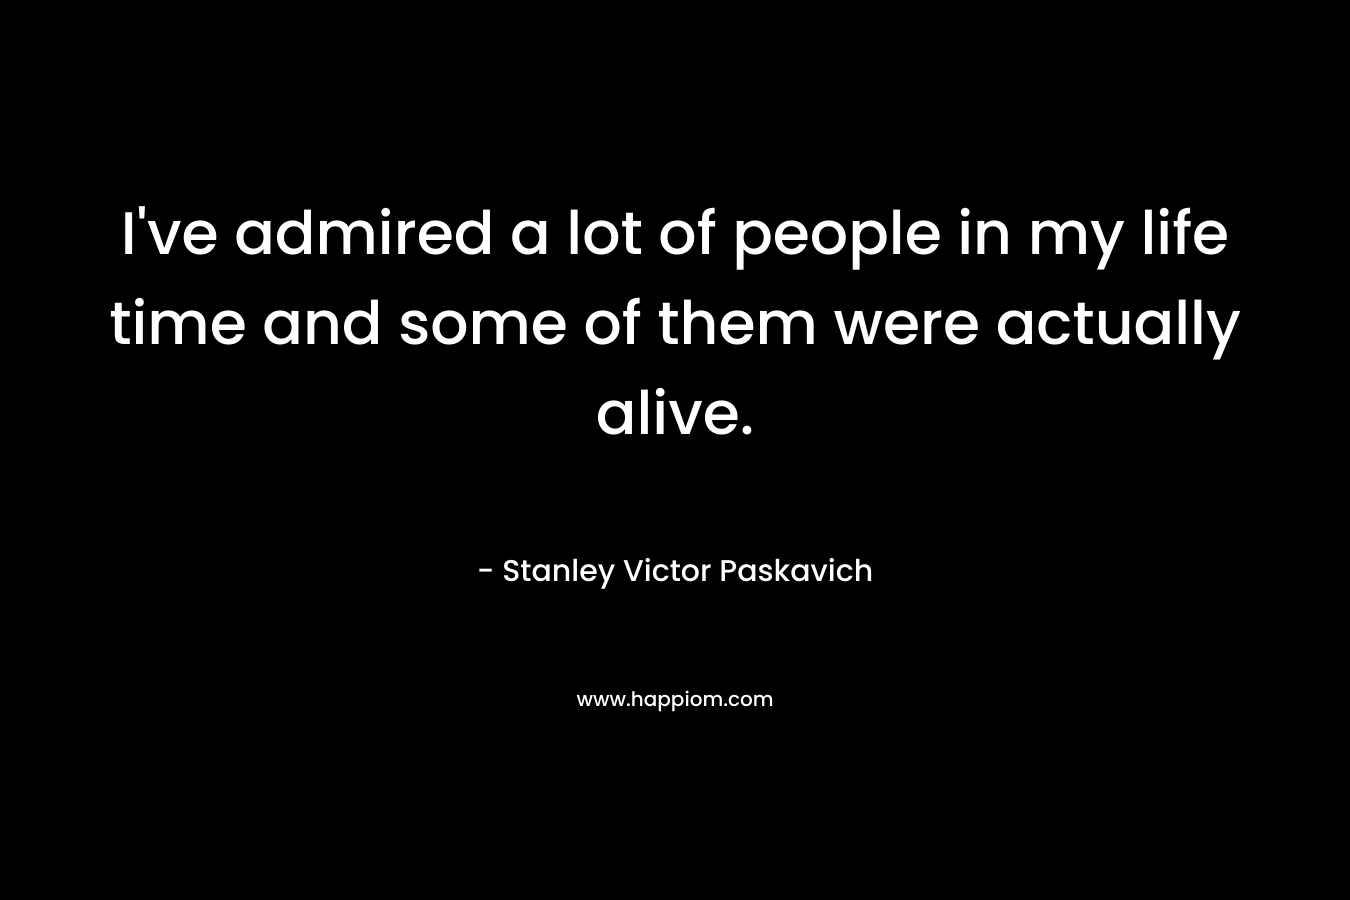 I've admired a lot of people in my life time and some of them were actually alive.